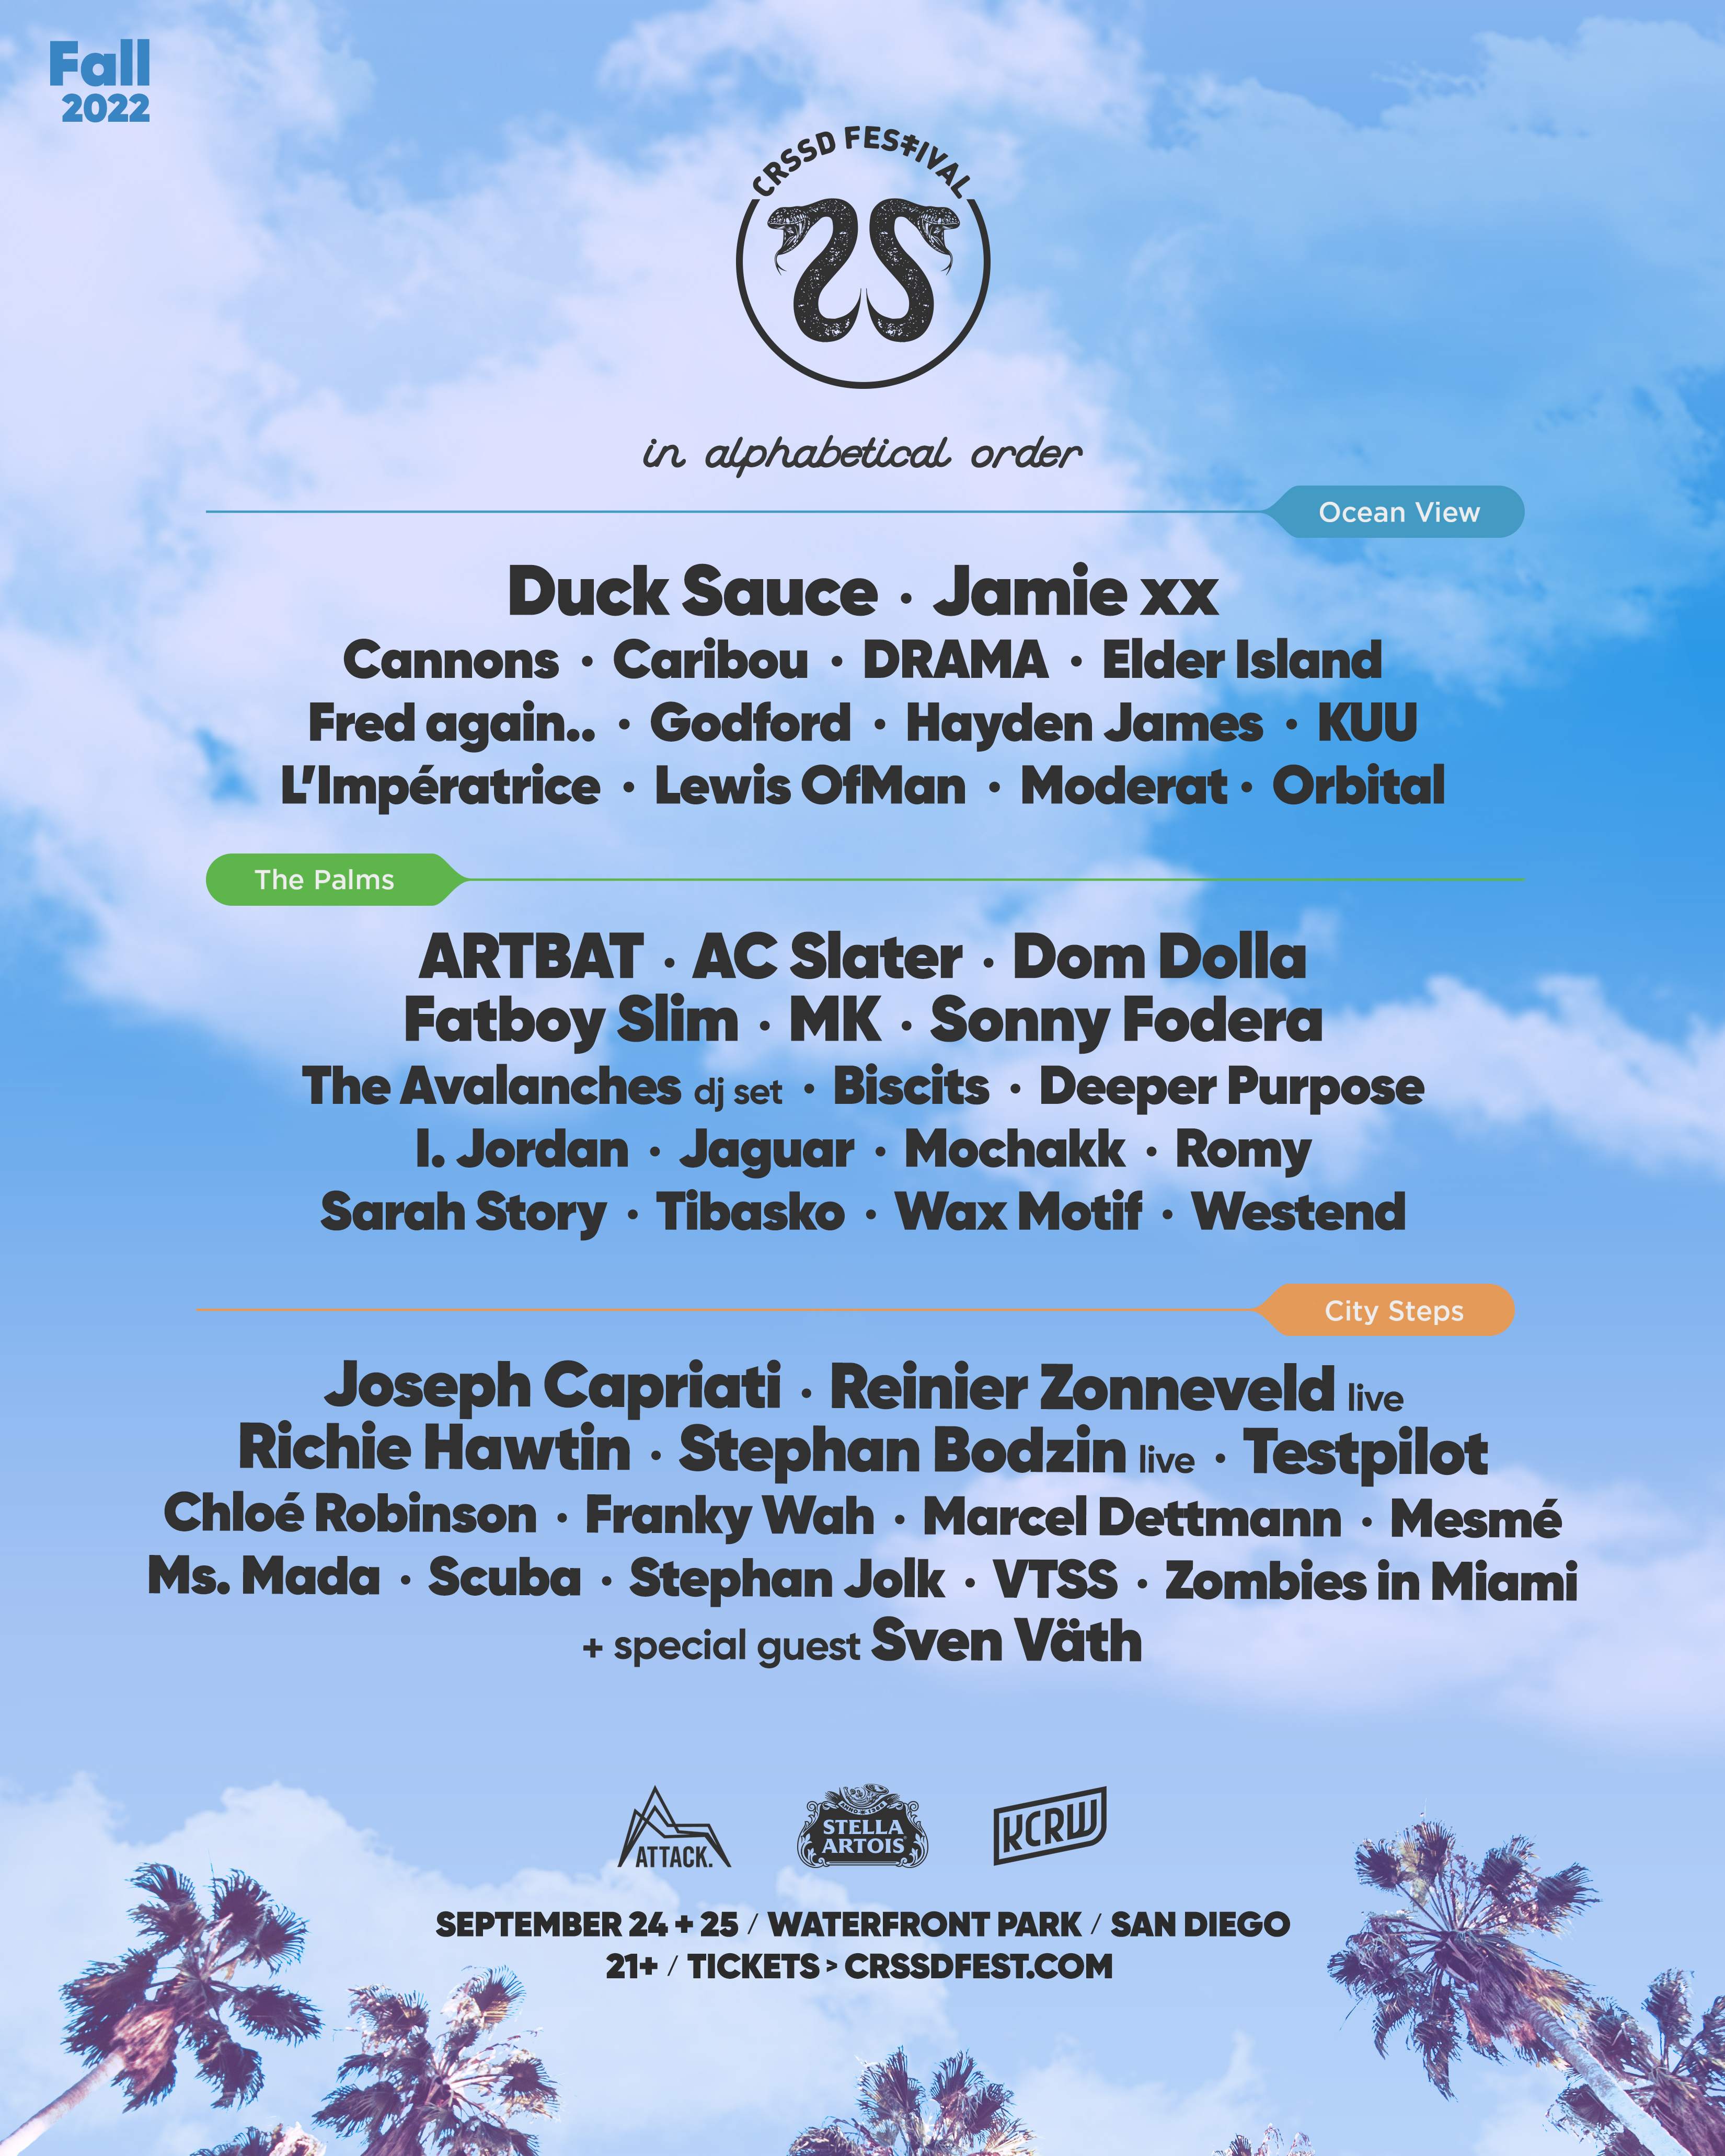 CRSSD Festival Fall 2022 at Waterfront Park in San Diego, San Diego